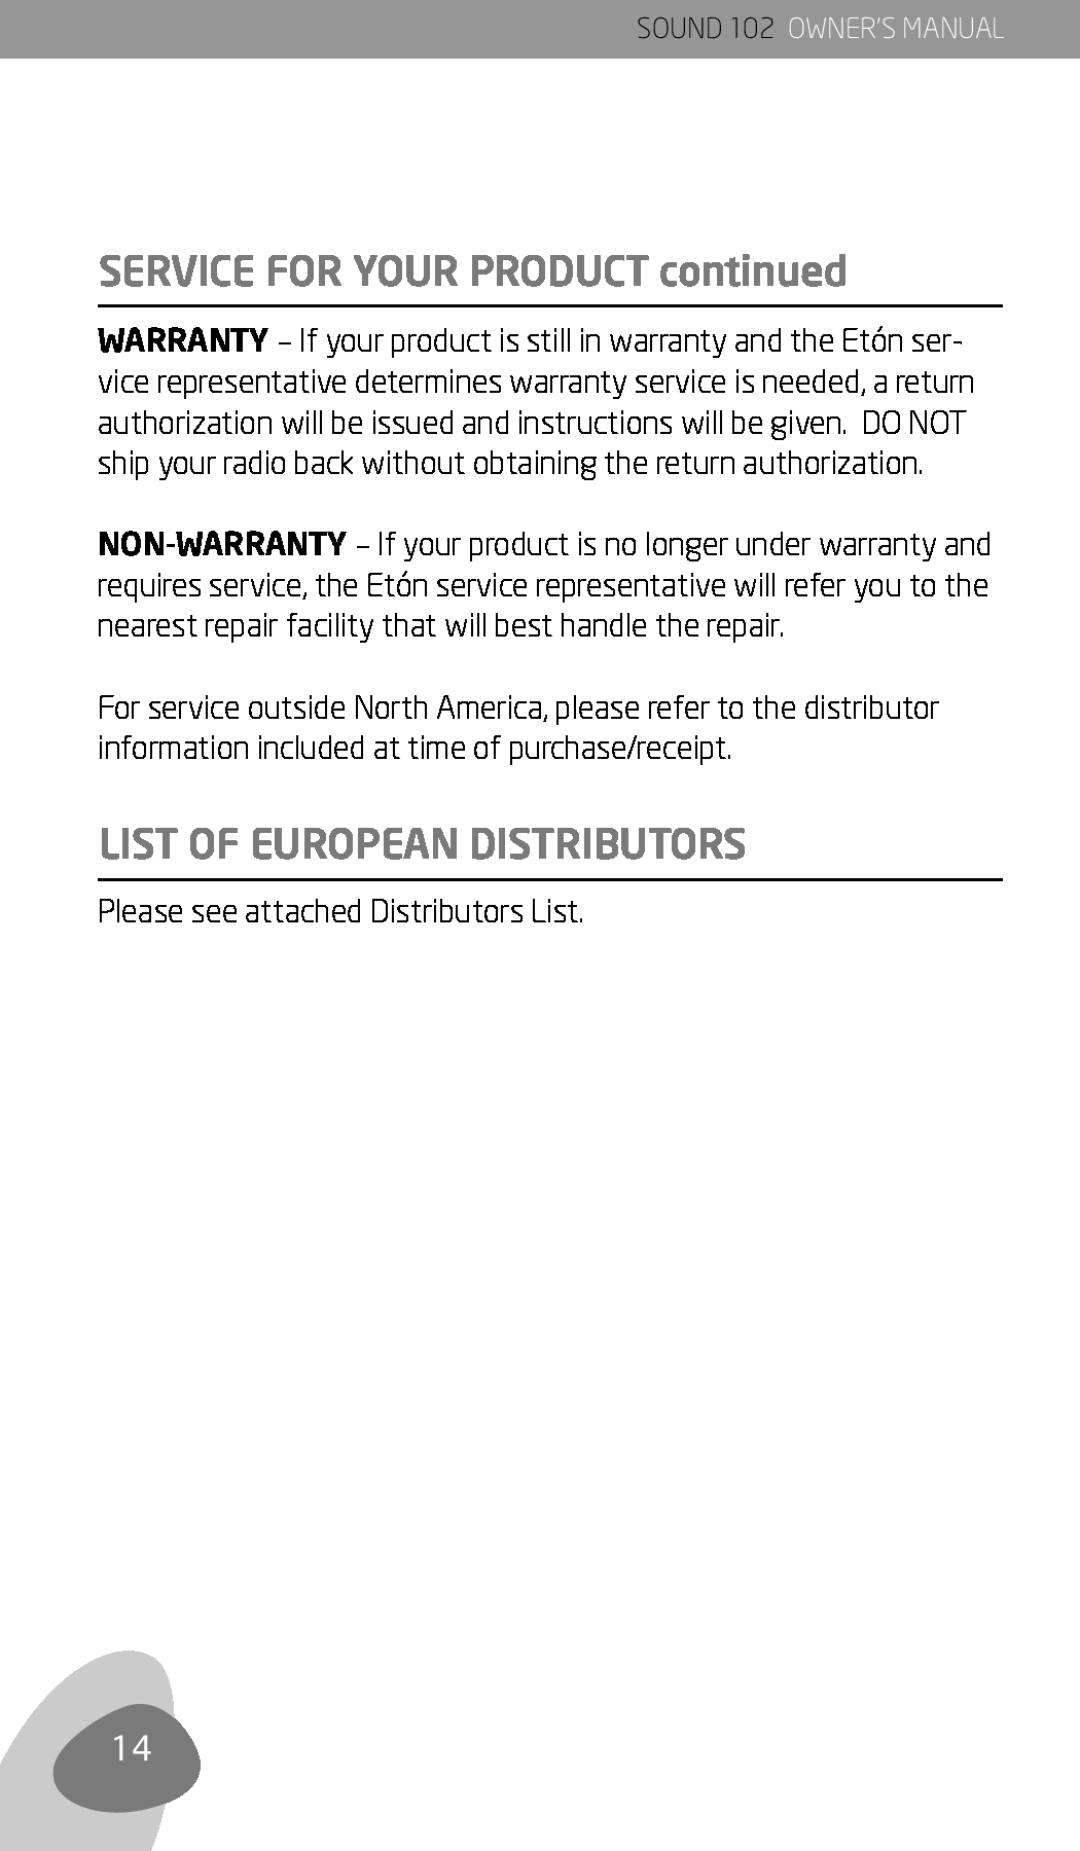 Eton 102 SERVICE FOR YOUR PRODUCT continued, List Of European Distributors, Please see attached Distributors List 